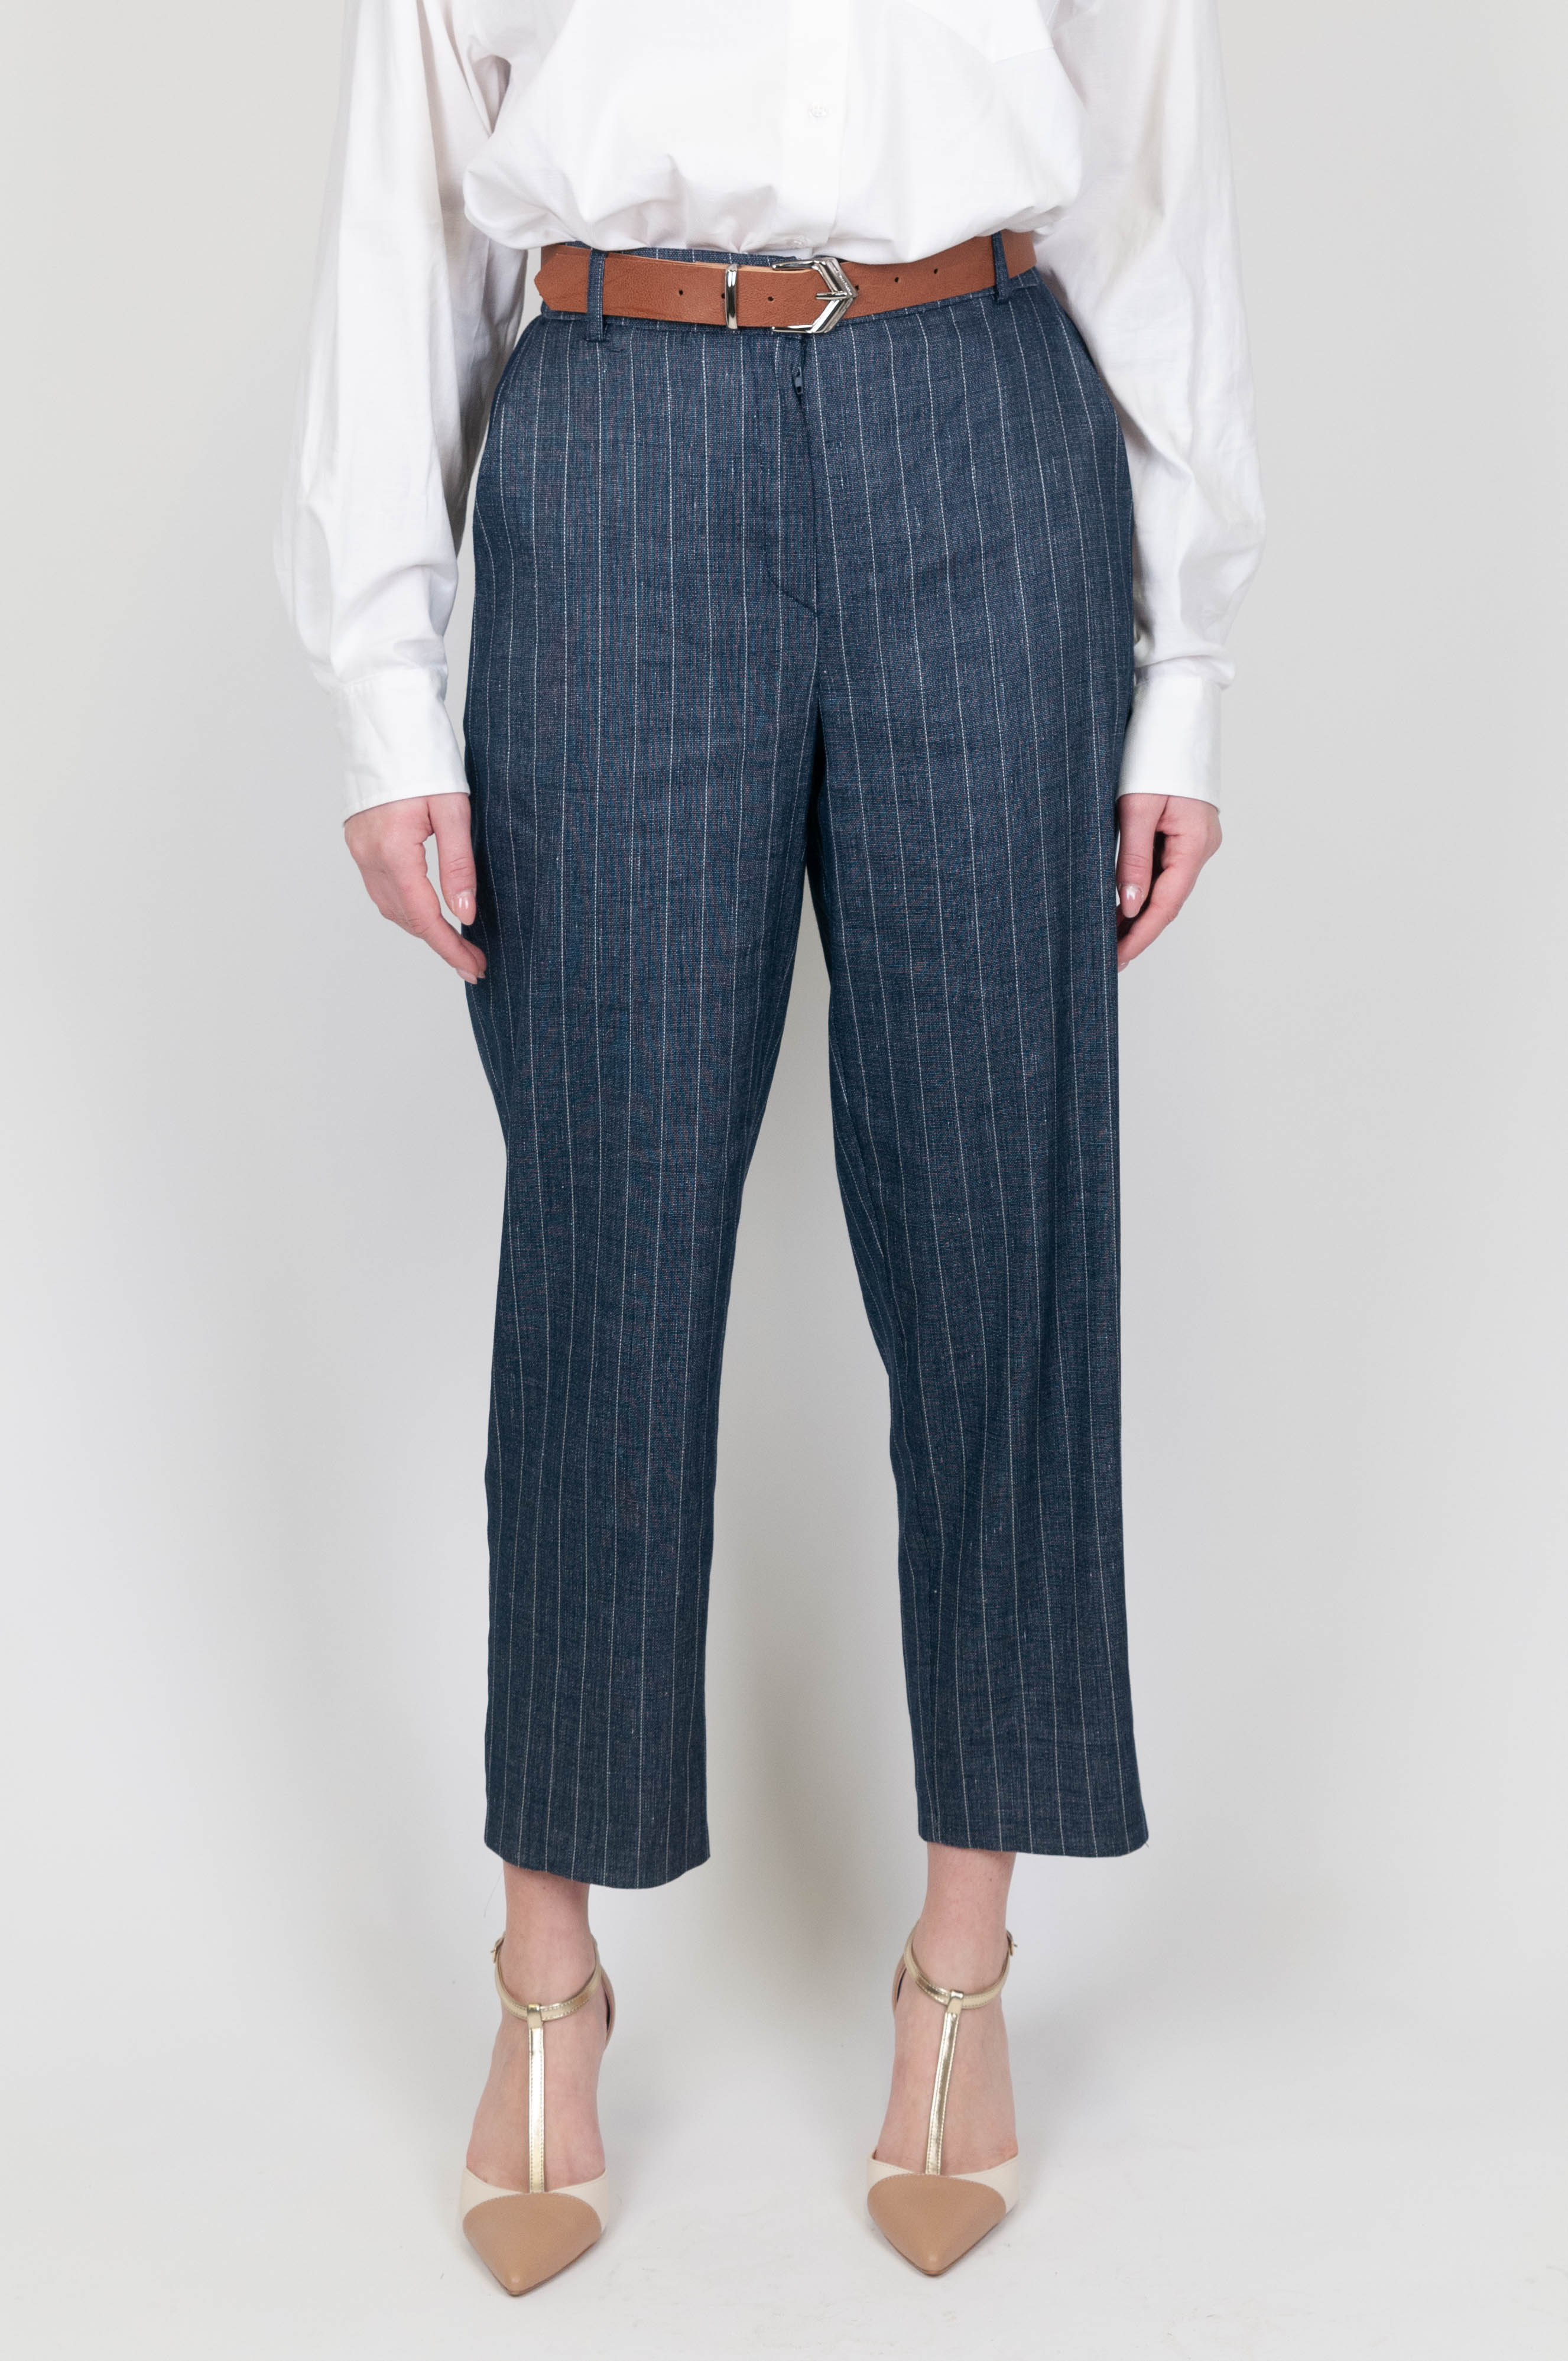 Motel - Regular pinstripe denim effect trousers with elastic on the back